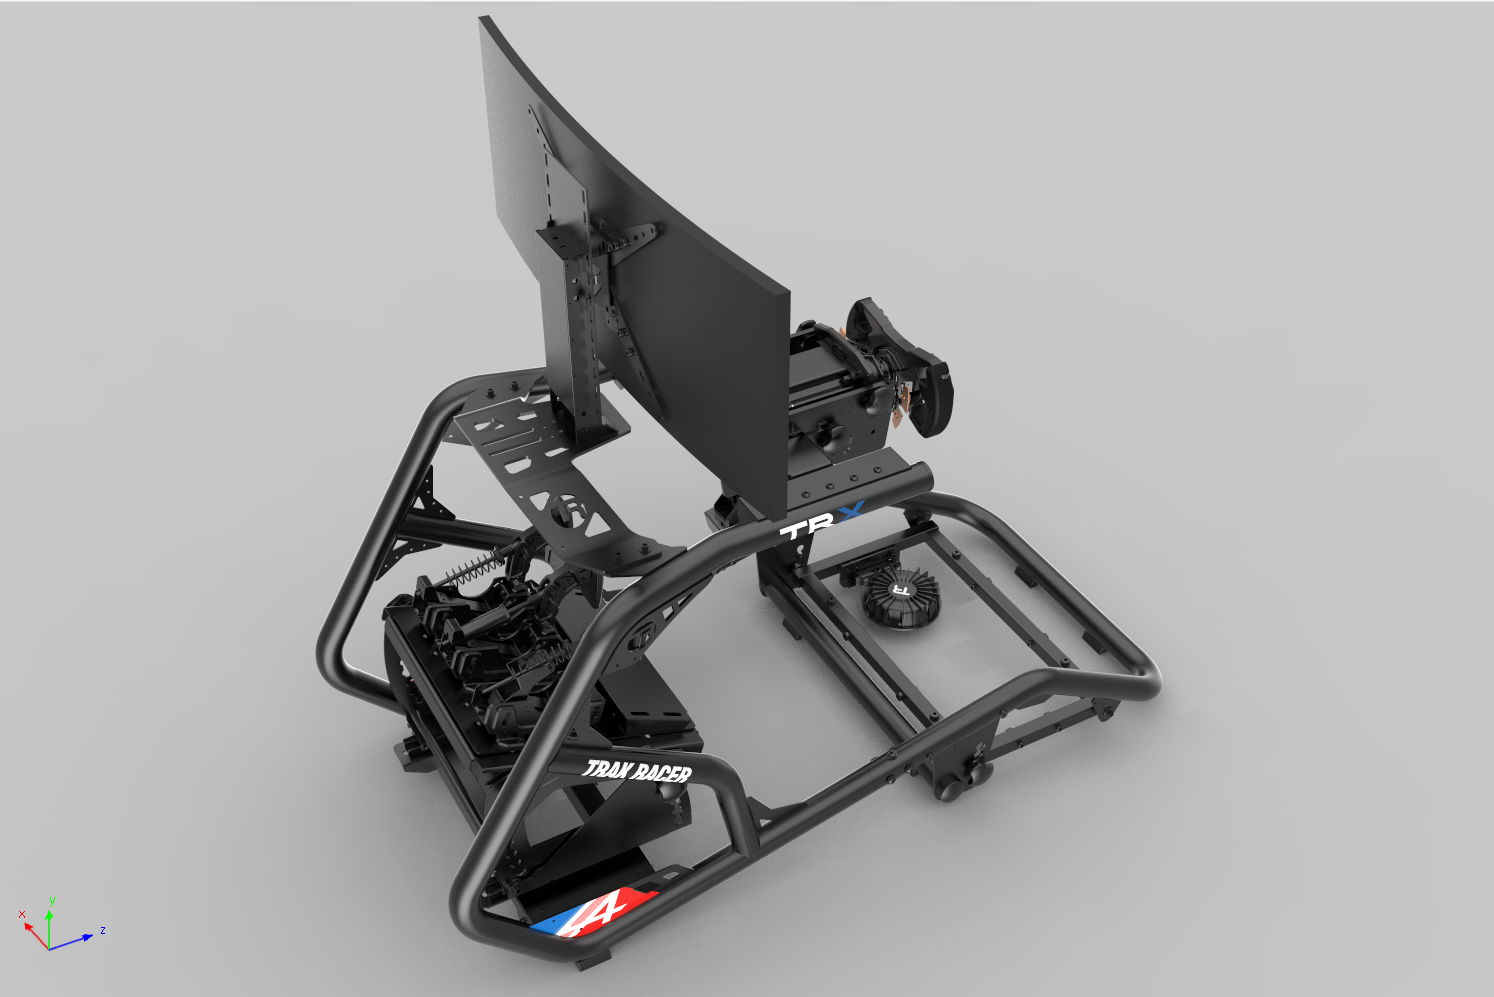 Question - Bass shaker for a racing sim